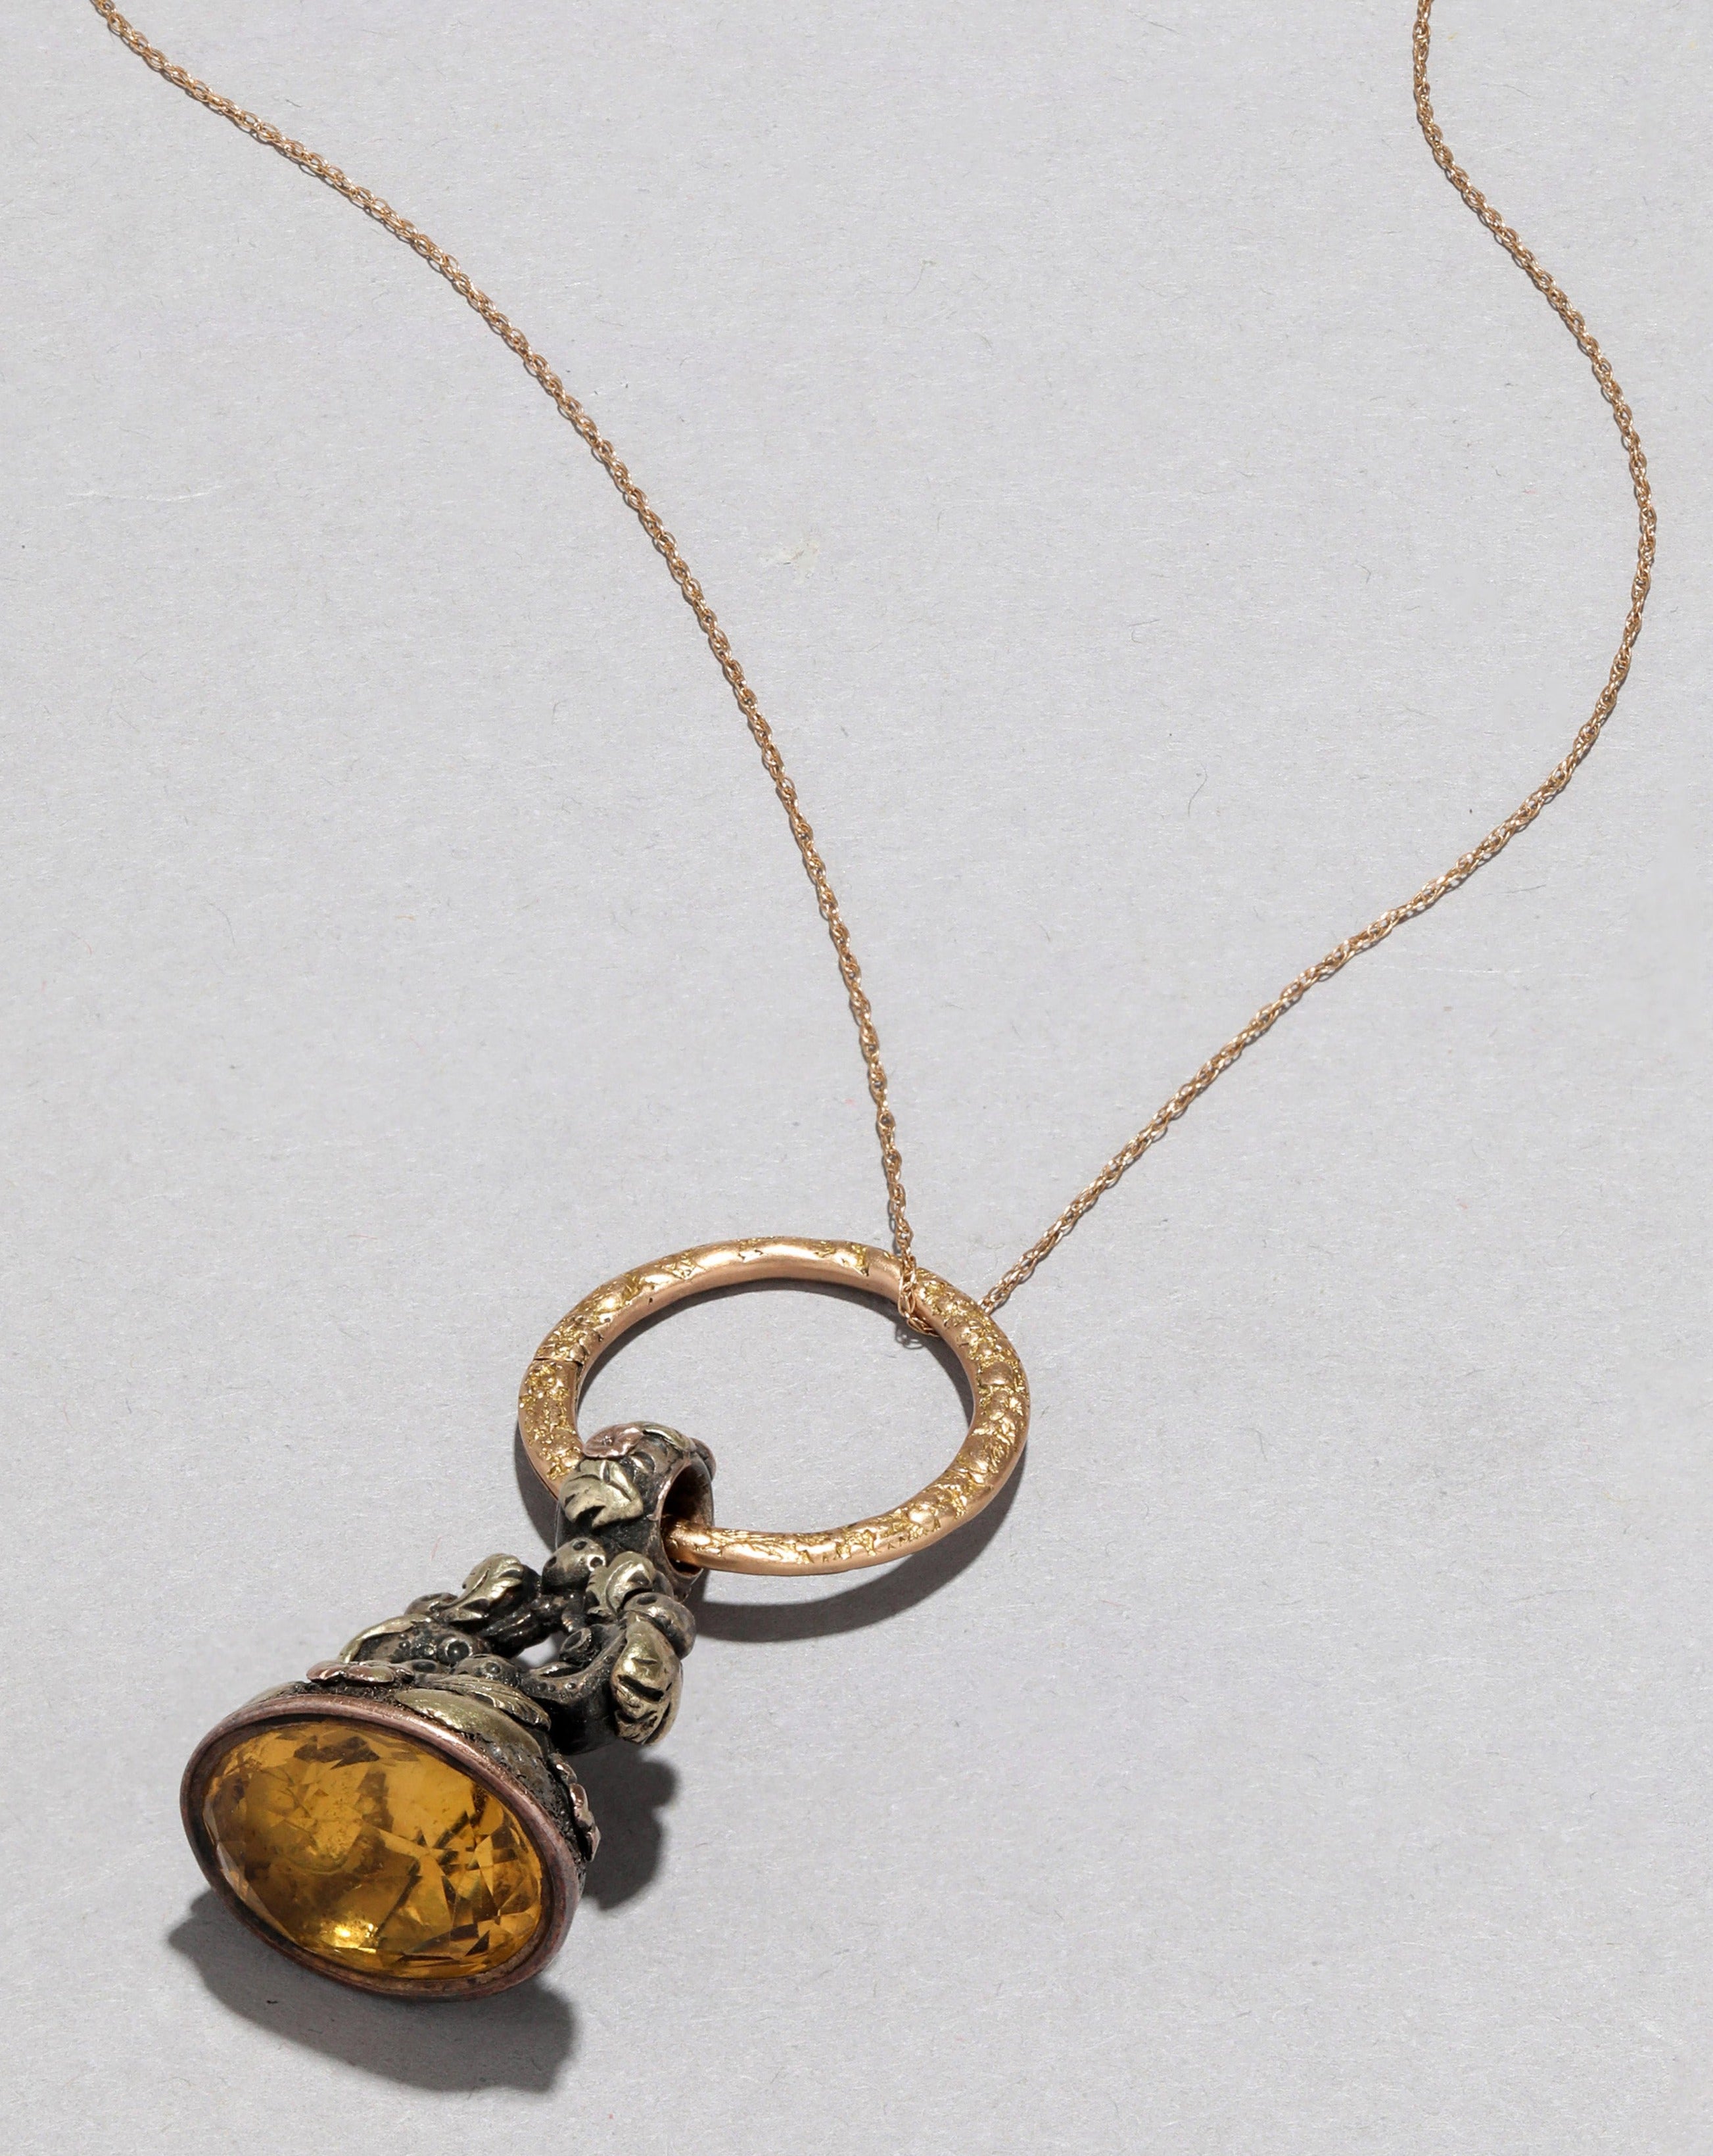 Alexis Bittar Antique Victorian 14K and Citrine Fob Necklace in Gold | Statement Jewelry from Alexis Bittar